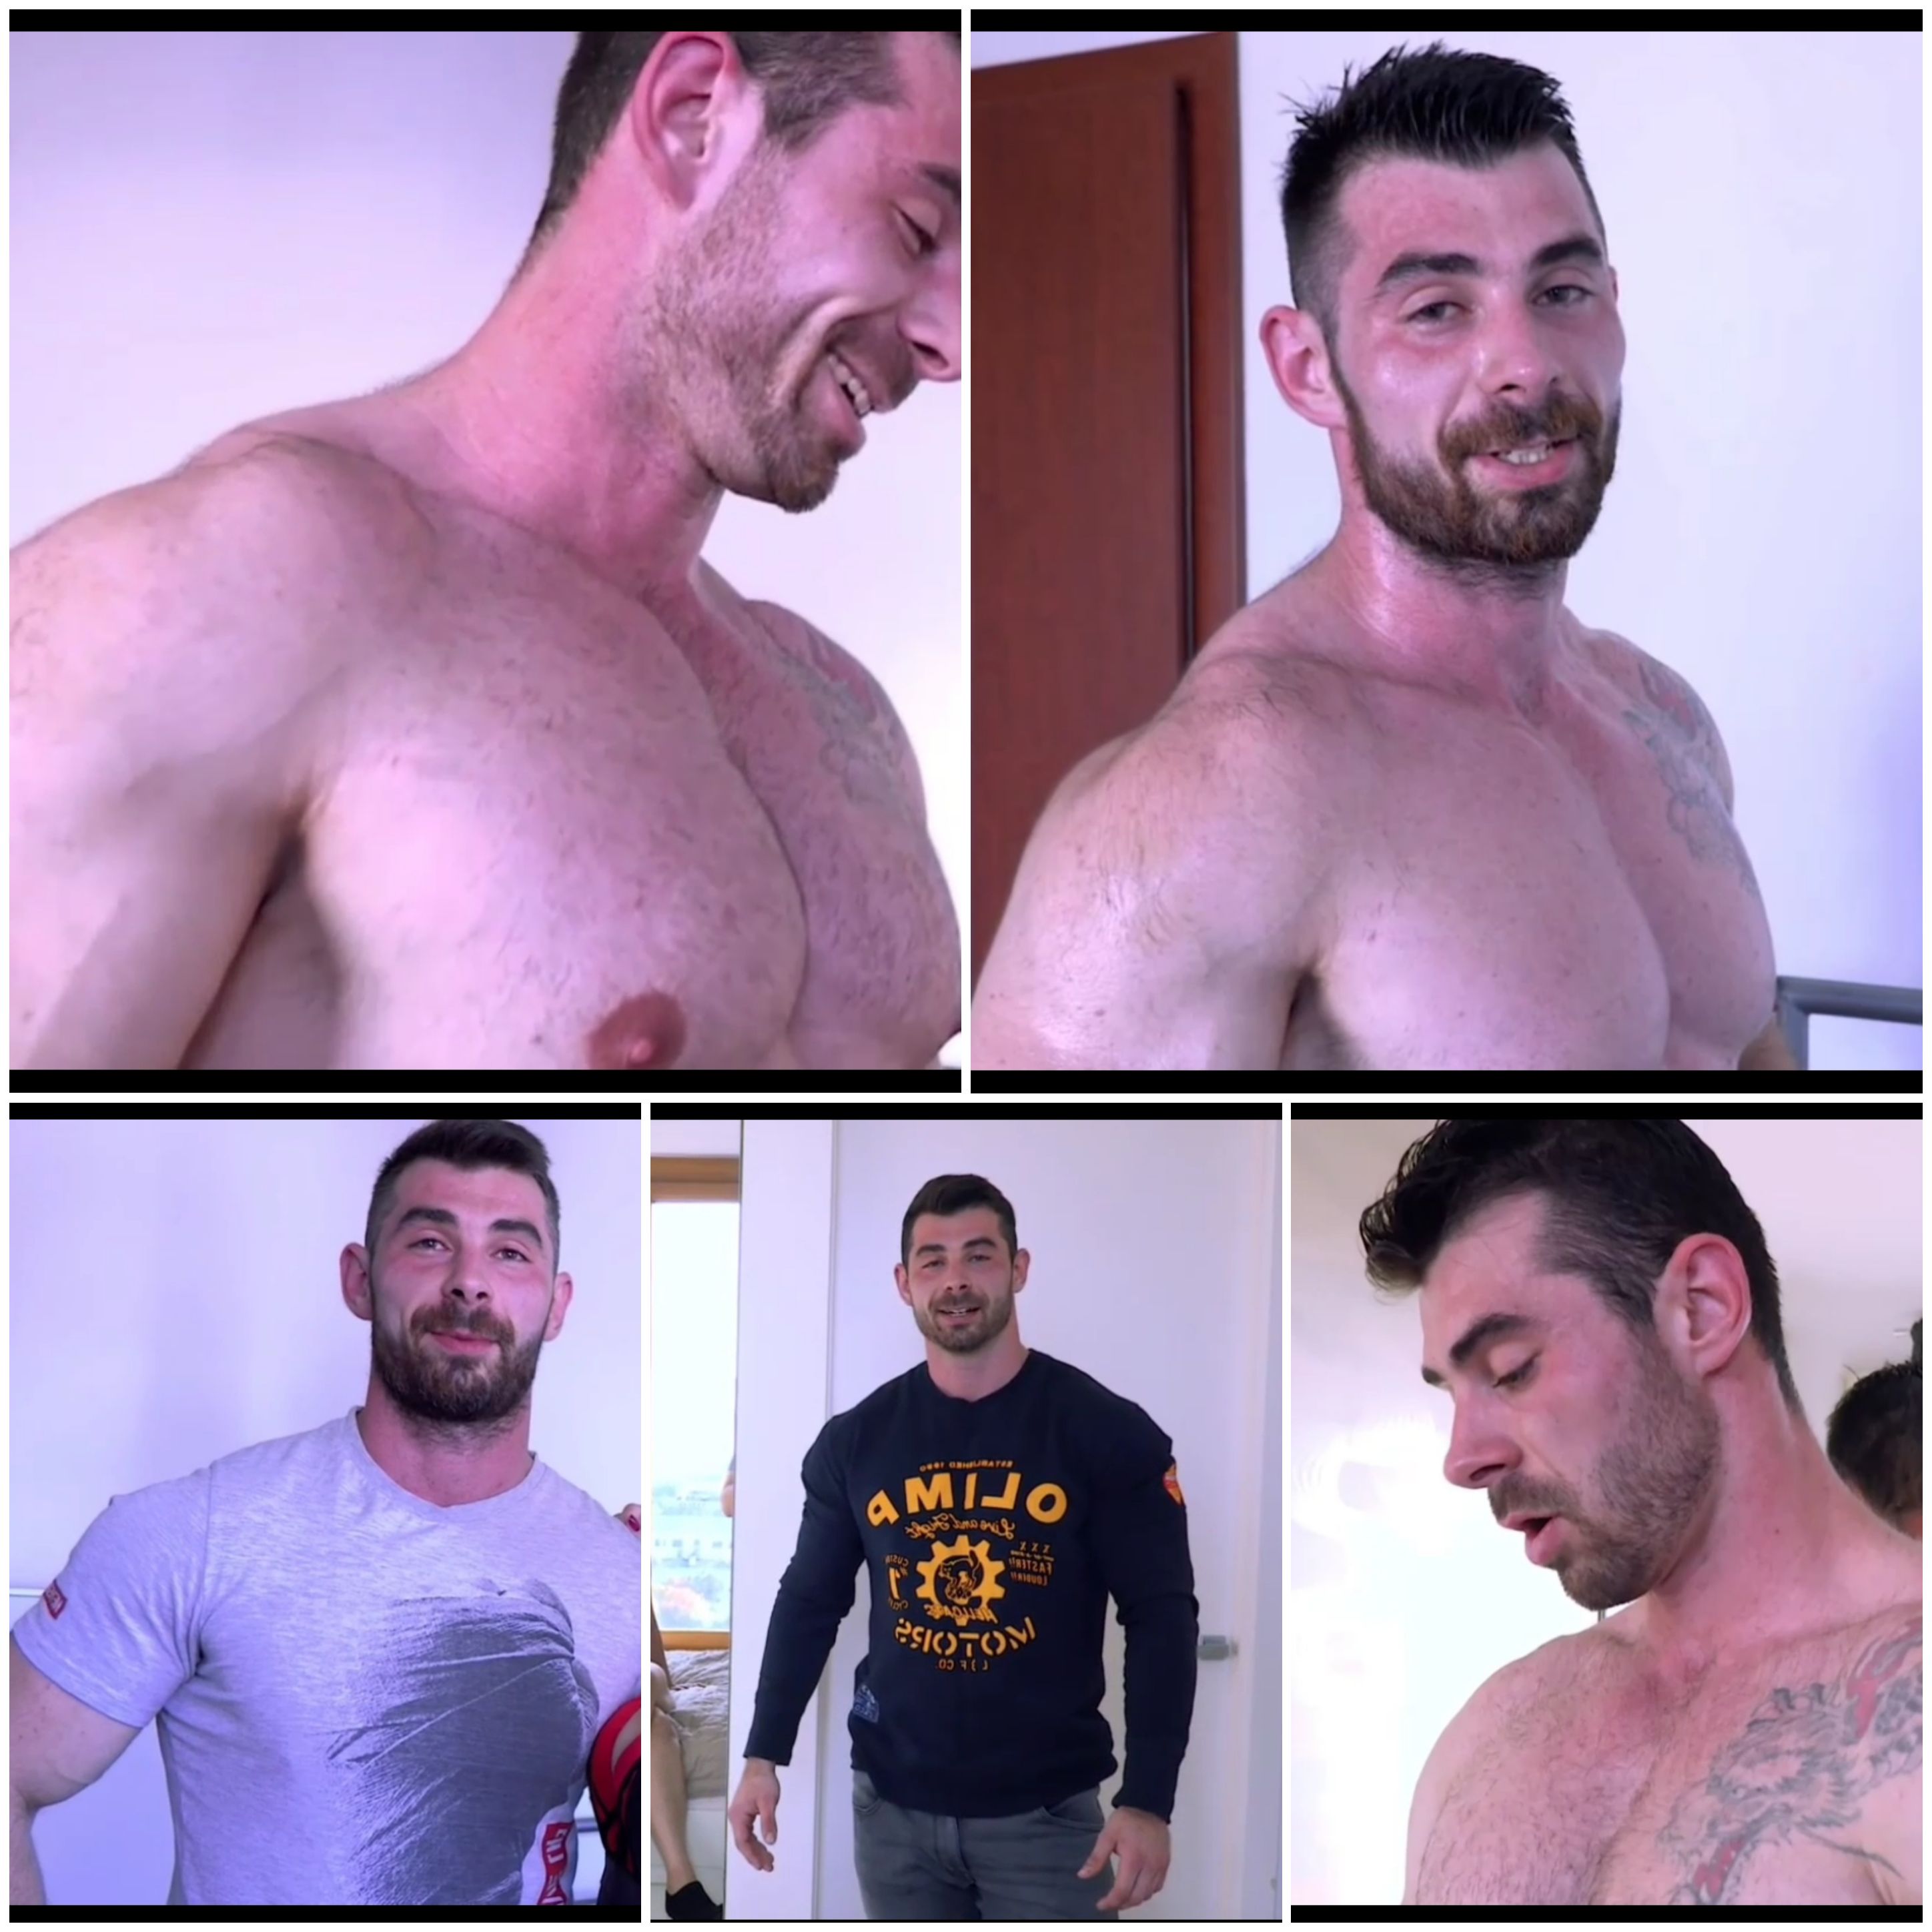 Teaser 4 Straight muscle daddy - ThisVid.com